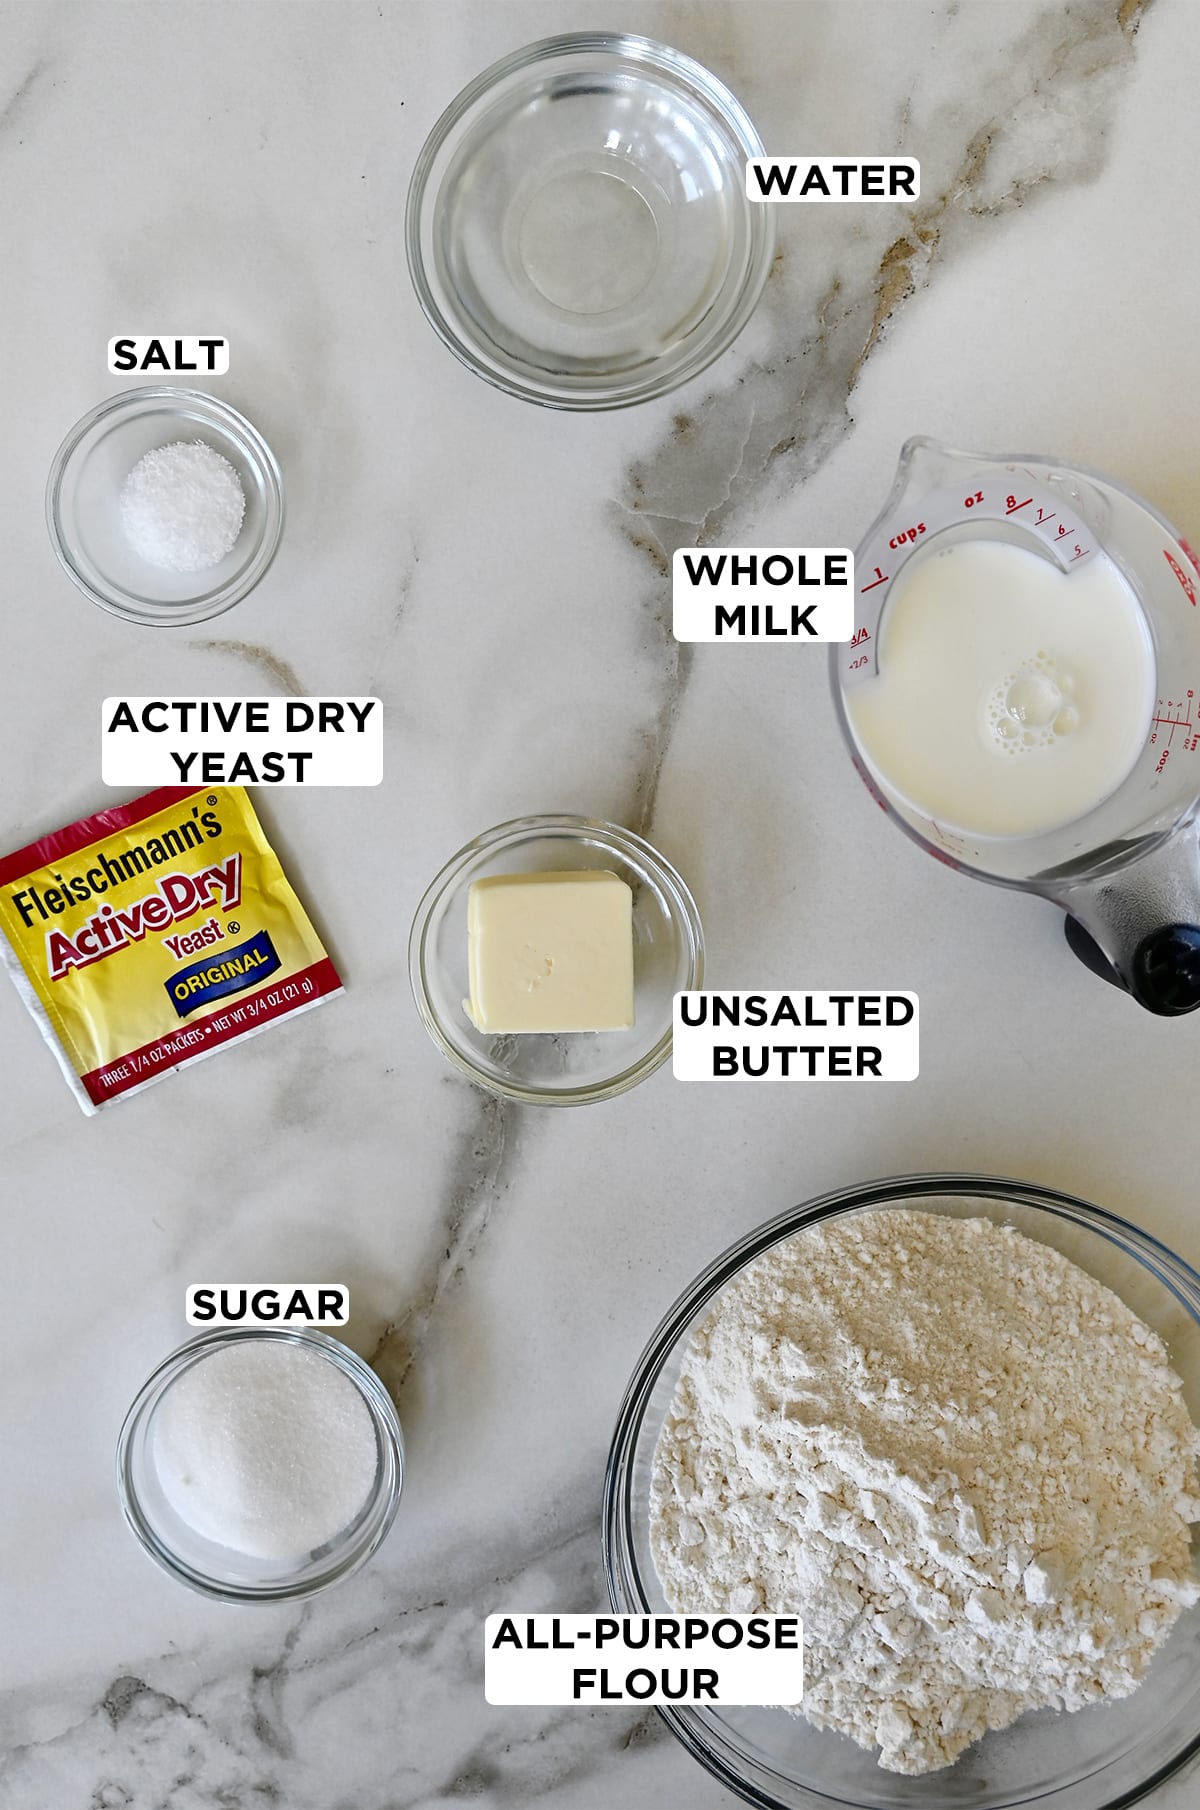 A packet of active dry yeast and a liquid measuring cup filled with whole milk are next to various sizes of clear bowls containing ingredients for dinner rolls, including water, butter, flour, sugar and salt.